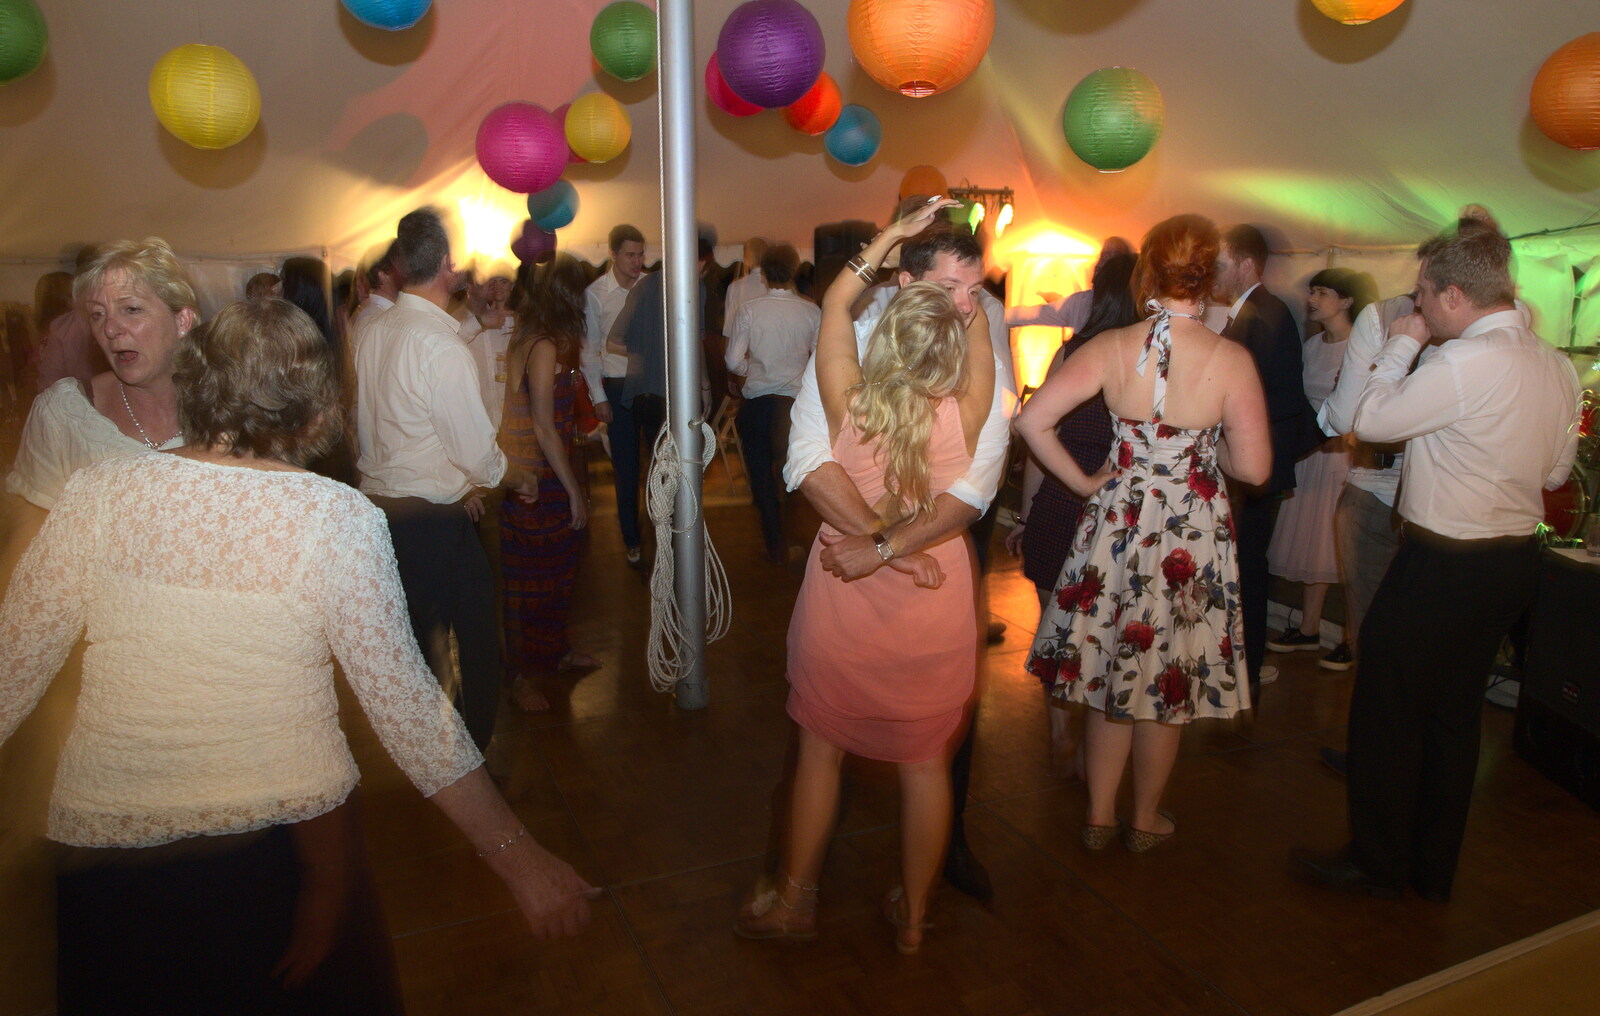 More dancing from The BBs Play Steph's Wedding, Burston, Norfolk - 13th July 2013